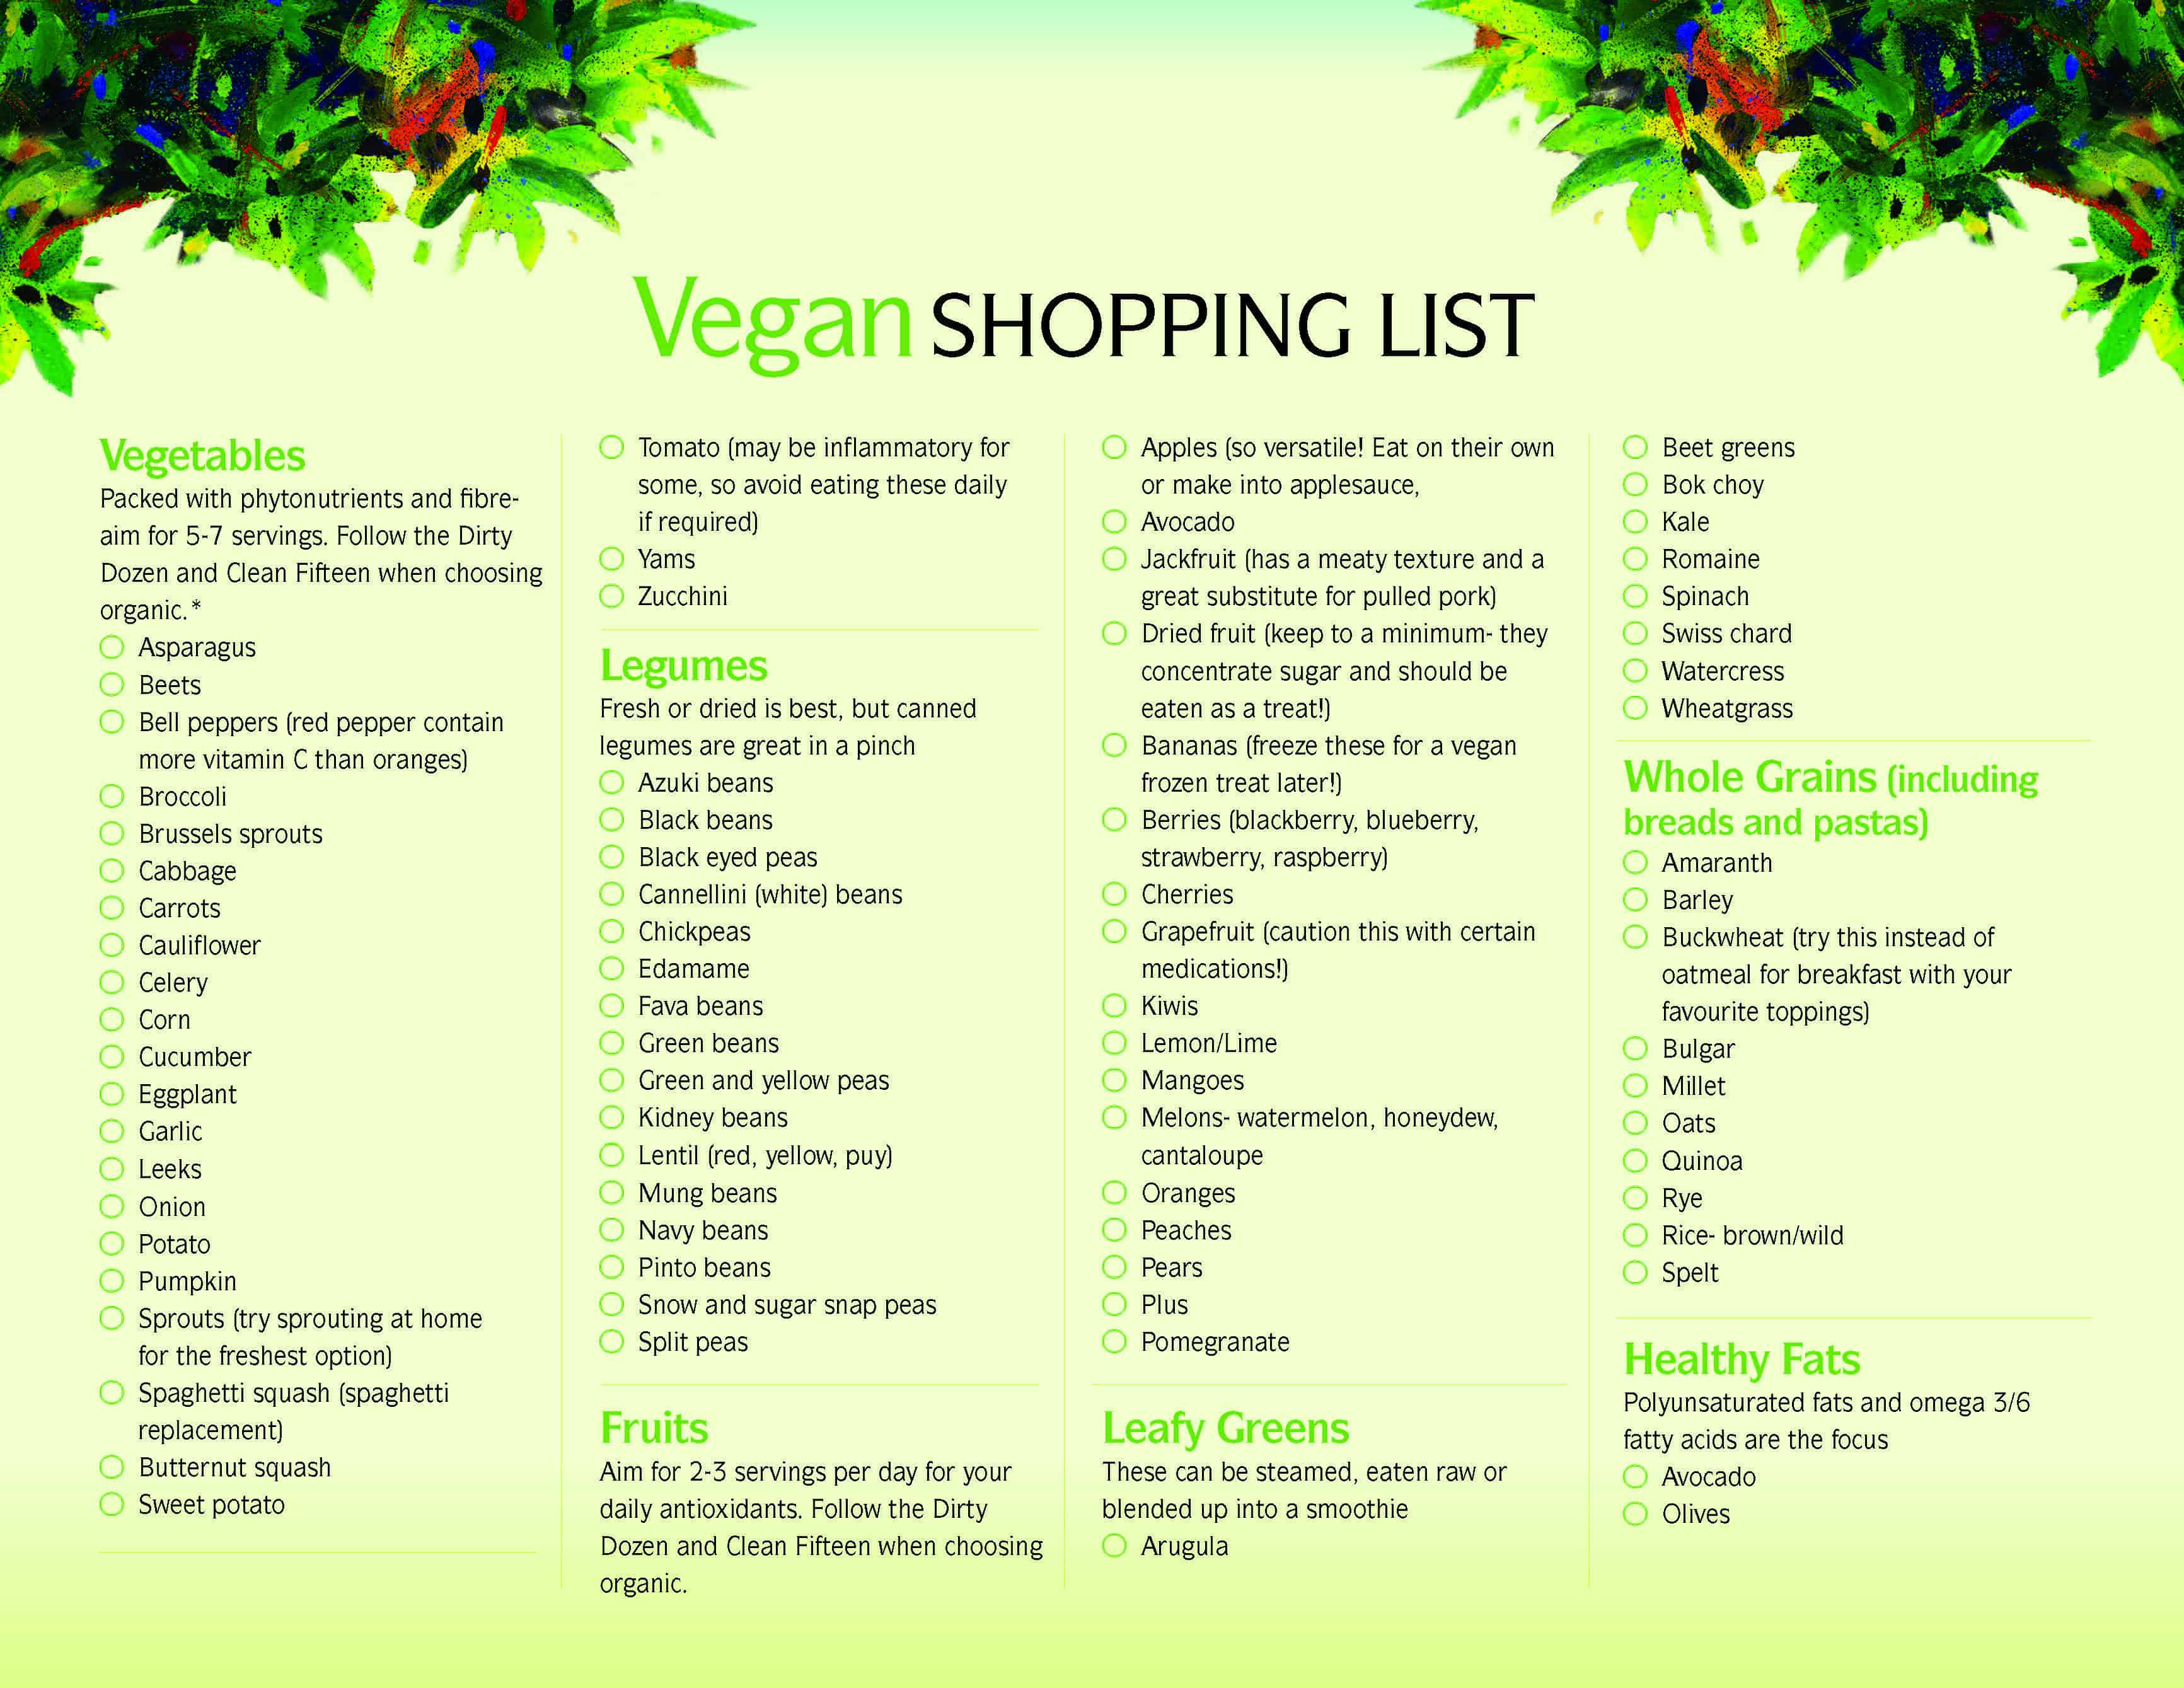 Full page of text titled Vegan Shopping list. the headings include: Vegetables, legumes, fruits, leafy greens, whole grains and health fats